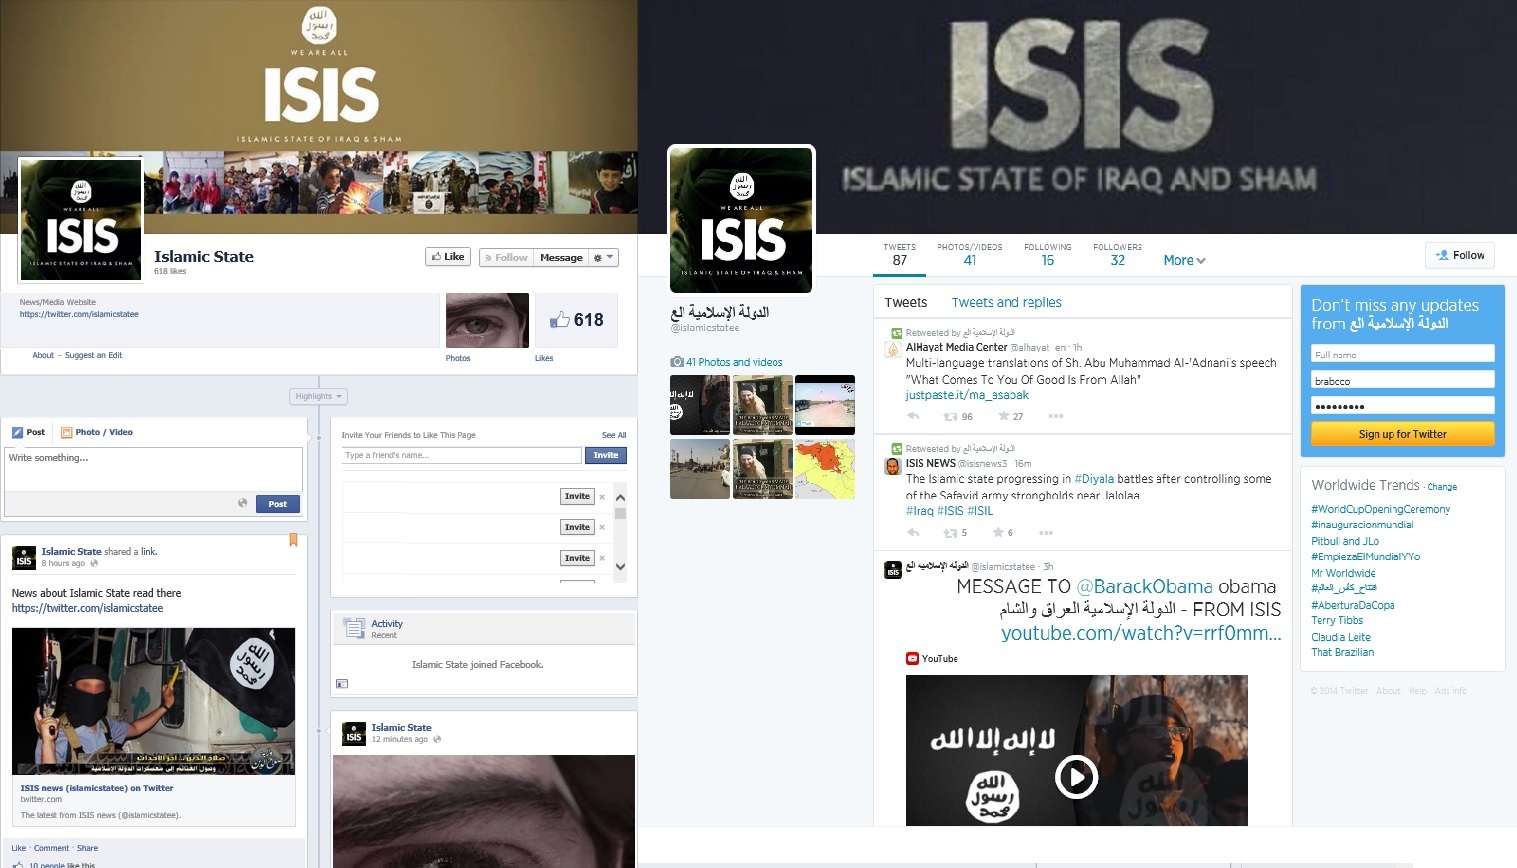 ISIS ‘Caliphate’ fades but social media empire remains